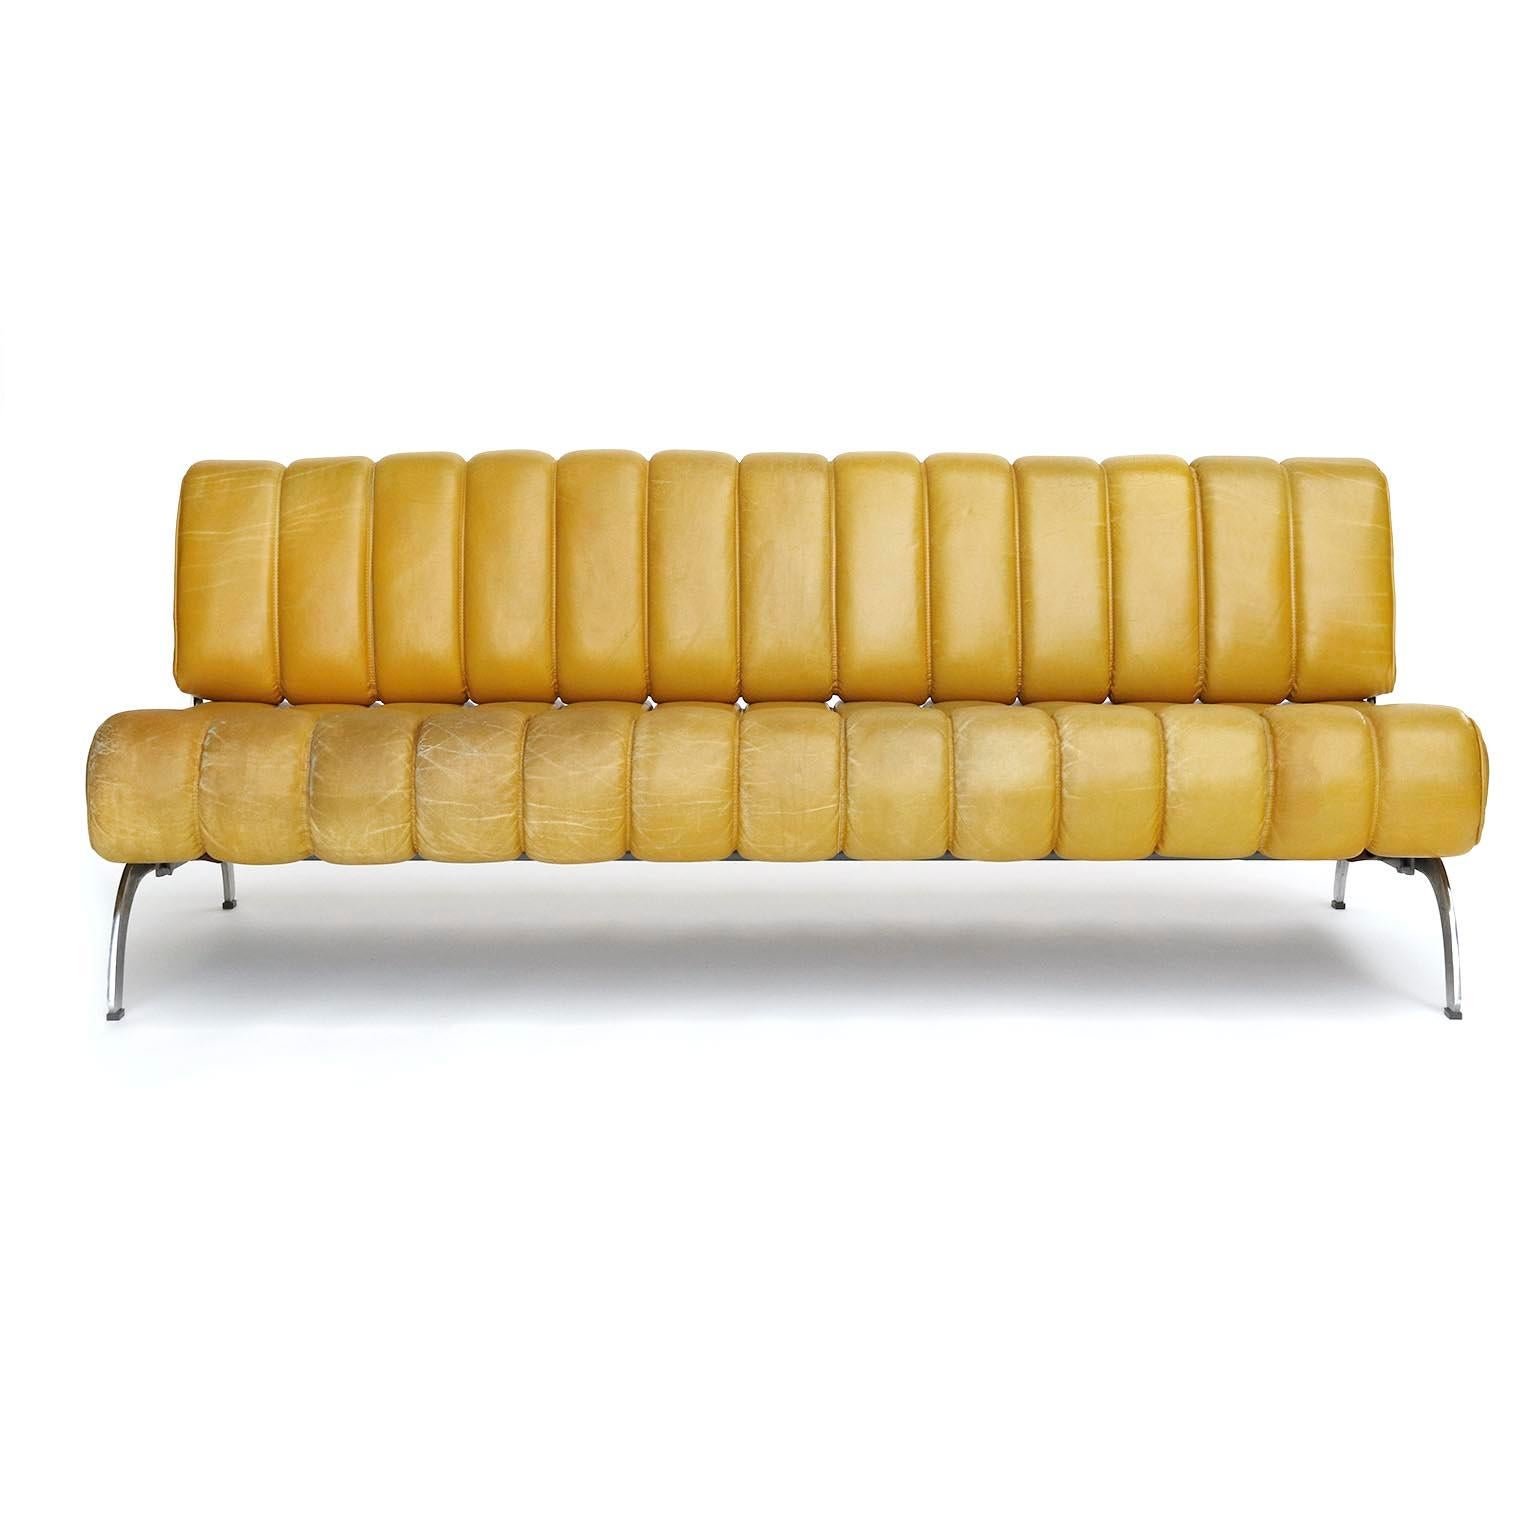 A set of a freestanding sofa, a pair of armchairs, and a table from the 'Independence' series designed by Karl Wittmann and manufactured by Wittmann Möbelwerkstätten, Austria, in midcentury, circa 1970.
This is a very rare set, especially in yellow